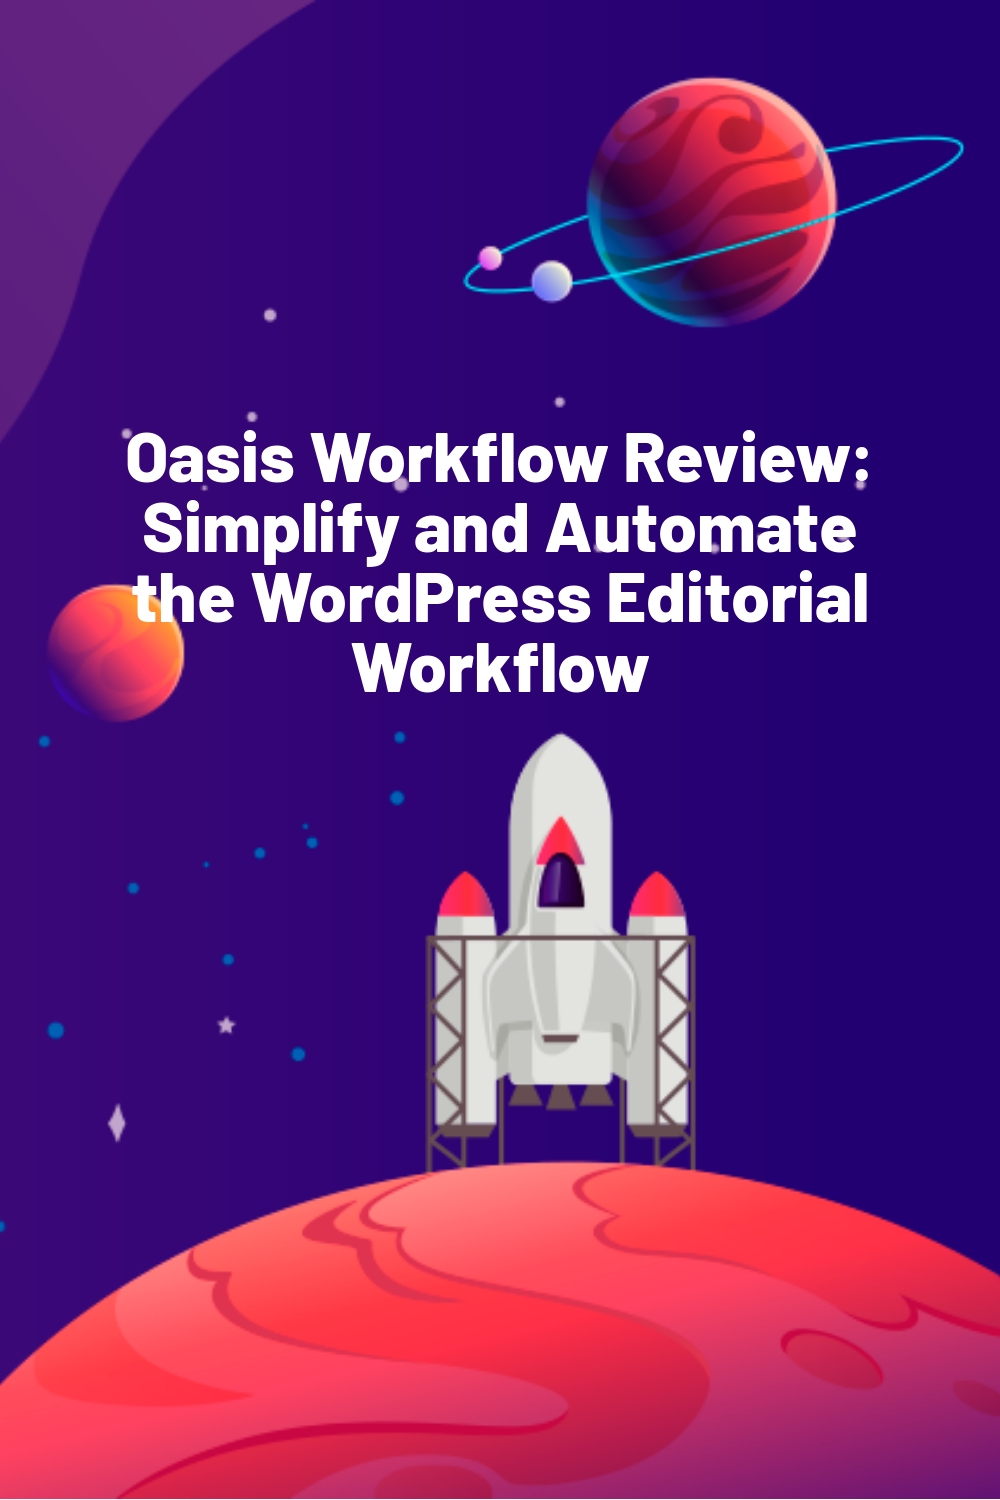 Oasis Workflow Review: Simplify and Automate the WordPress Editorial Workflow